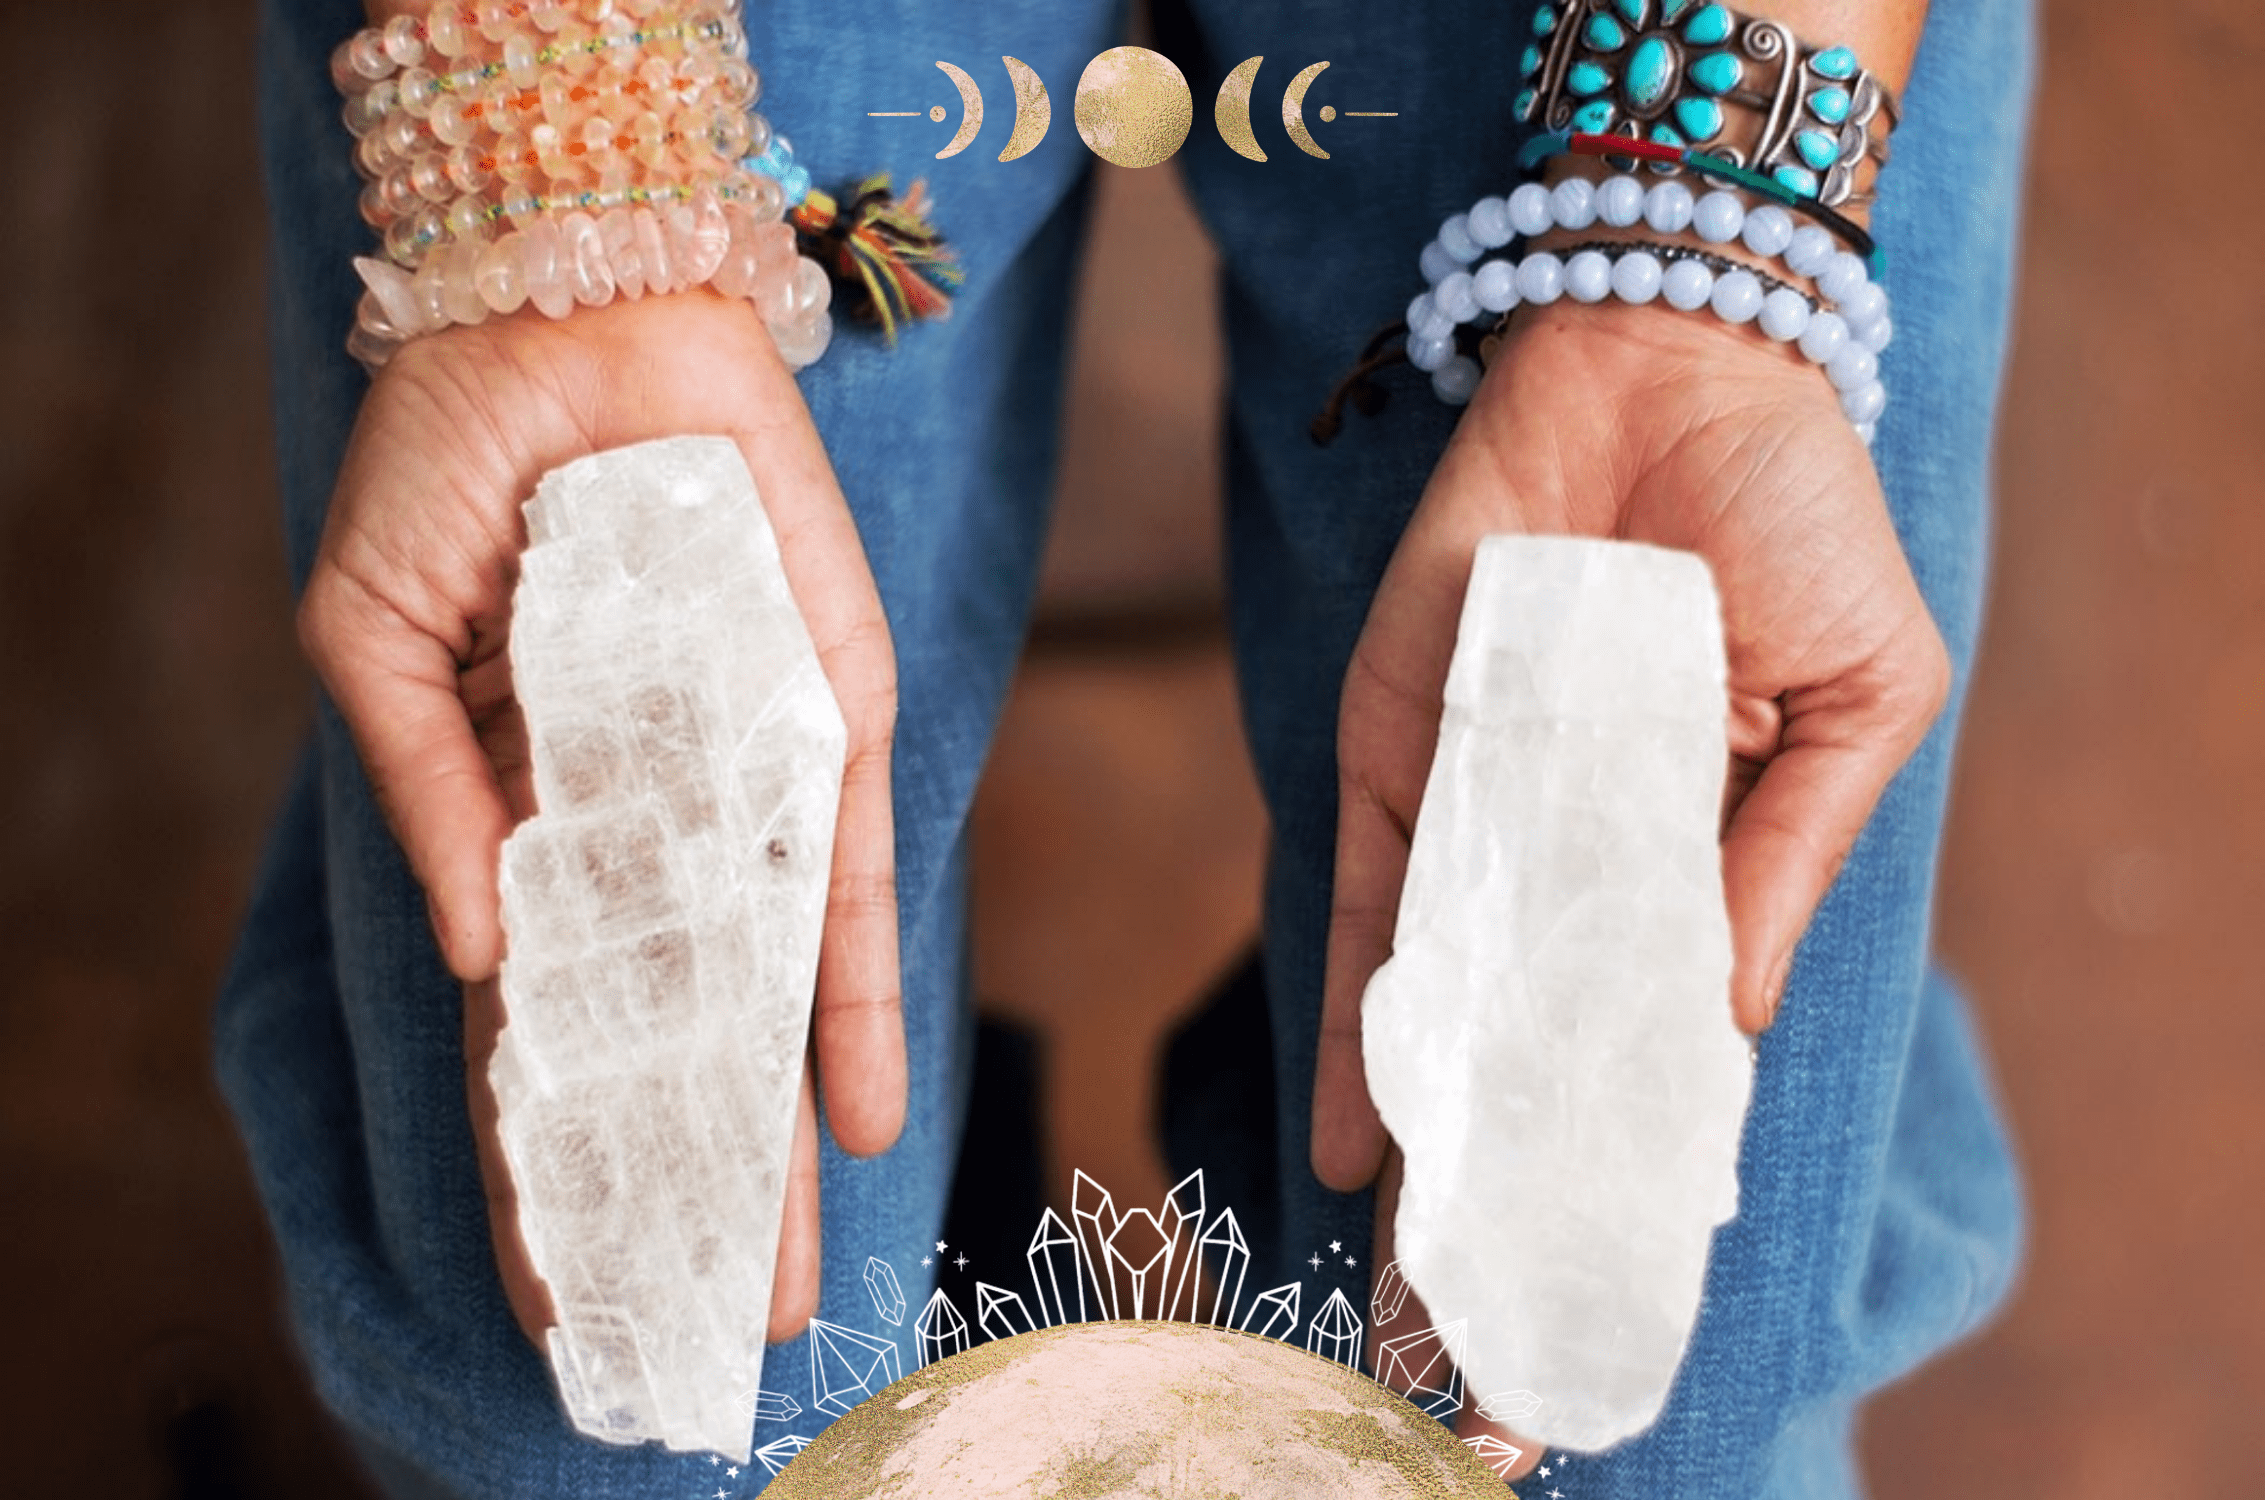 Clearing Cords with Crystal Energy: An Interview with Heather Askinosie & Timmi Jandro from Energy Muse